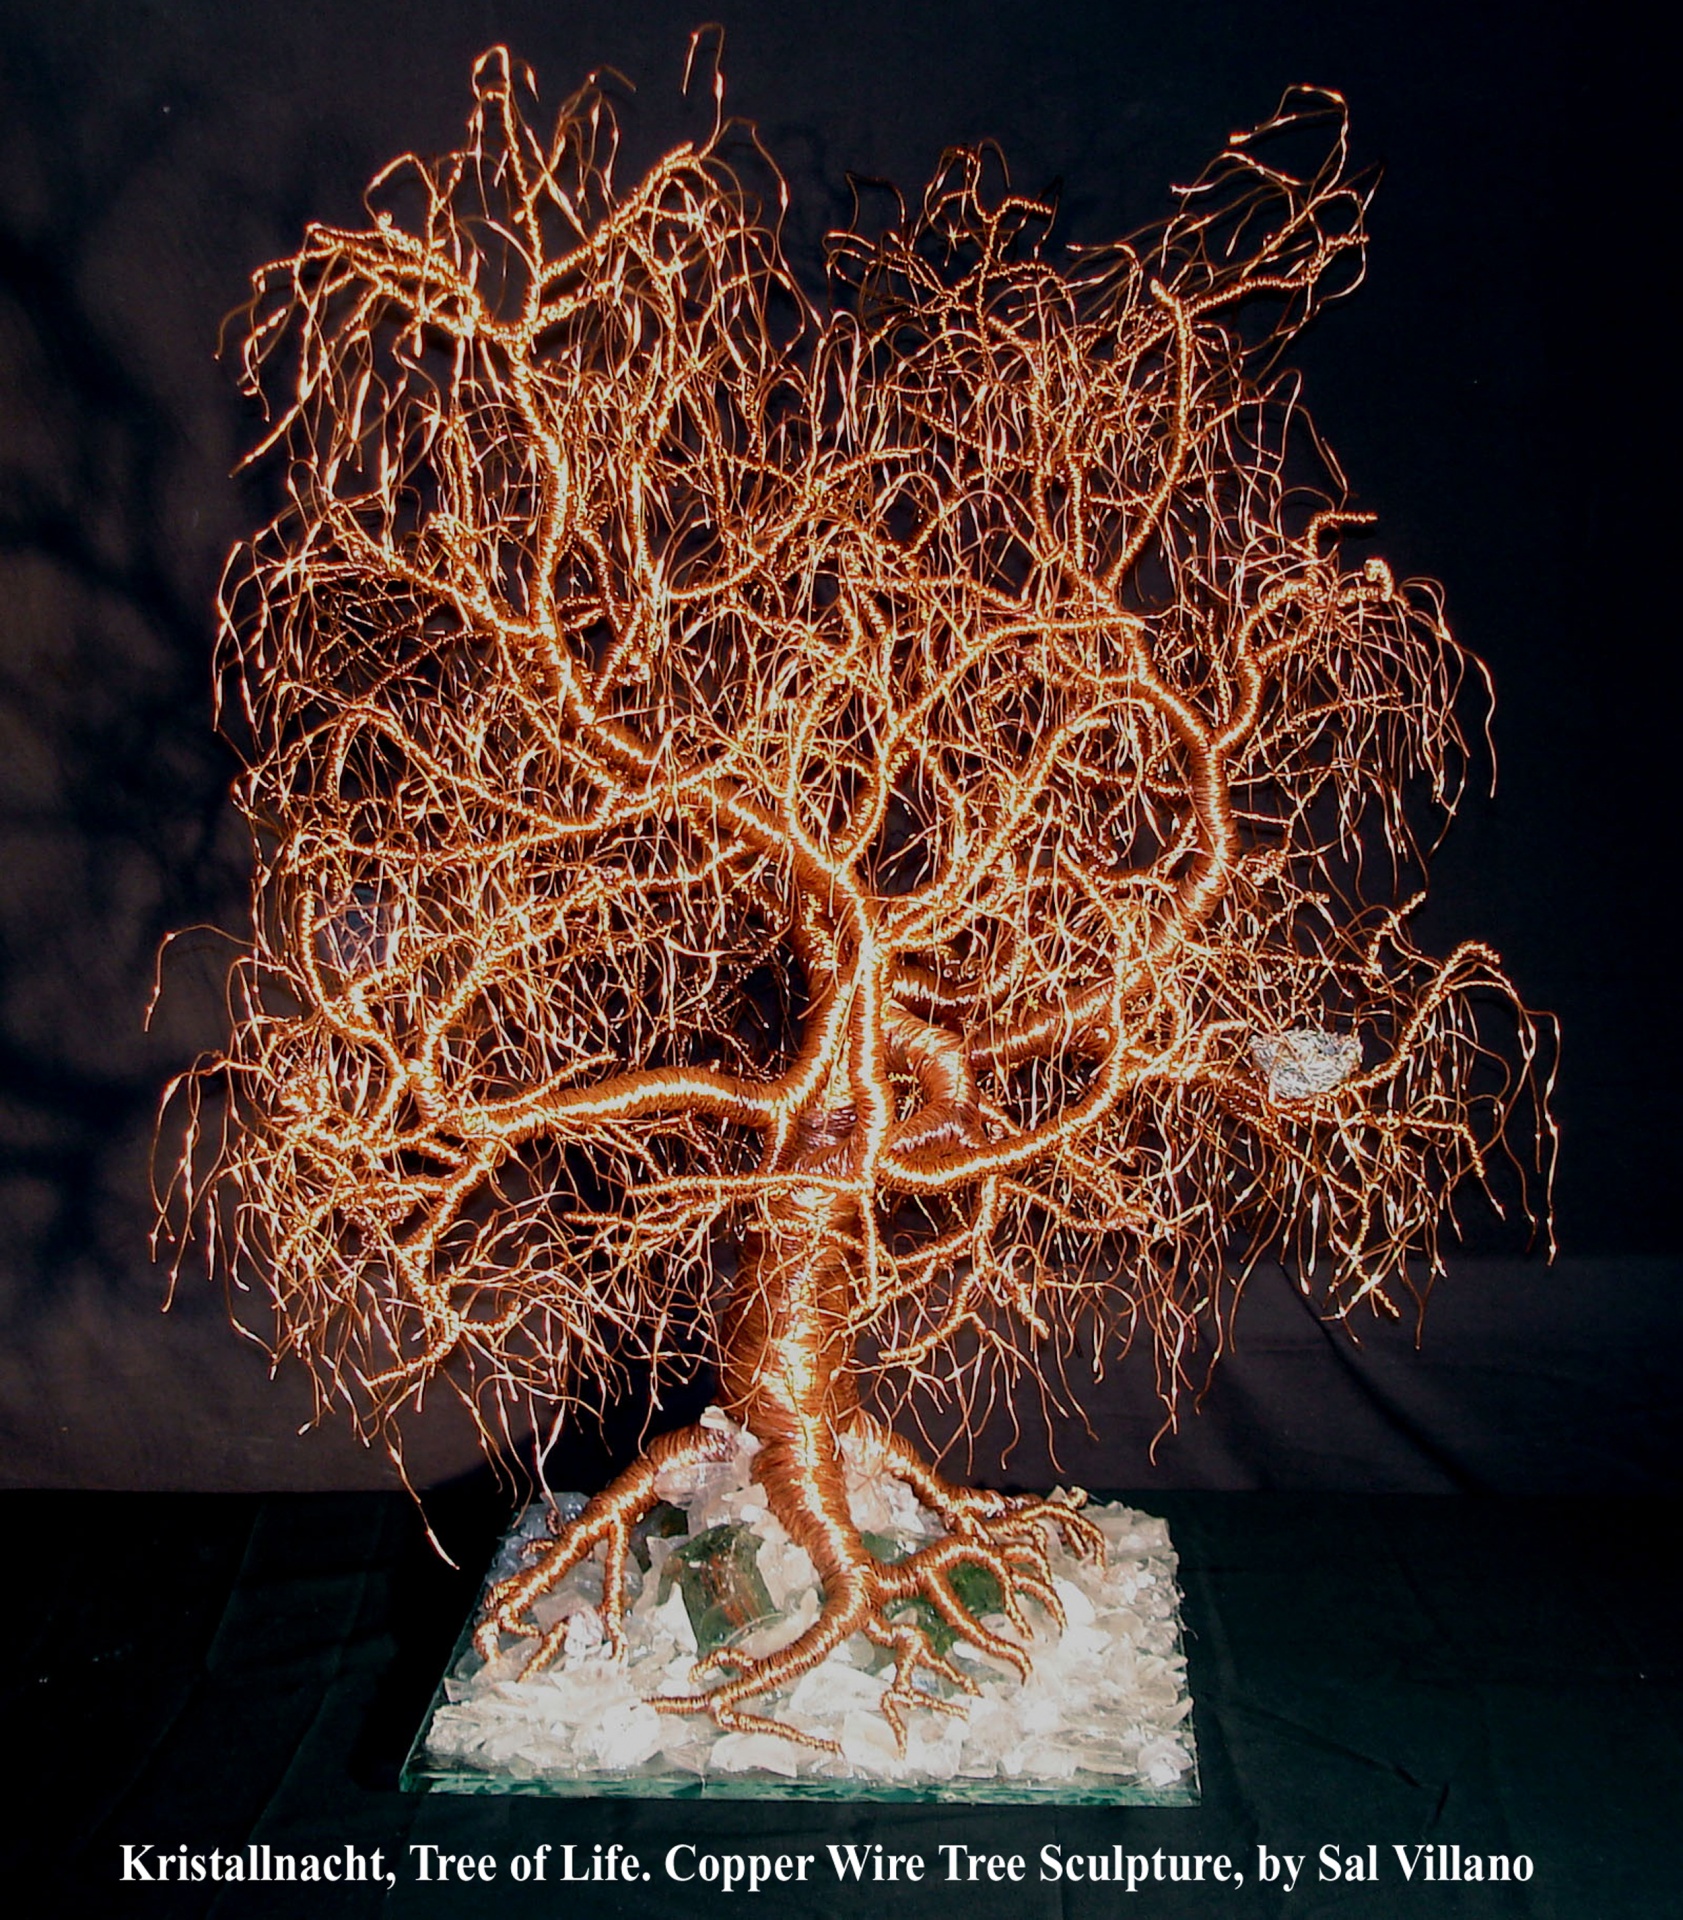 Kristallnacht, Tree of Life, wire tree sculpture Kristallnacht, or The Night of Broken Glass, was a series of government-sanctioned attacks against the Jewish population of Germany and Austria